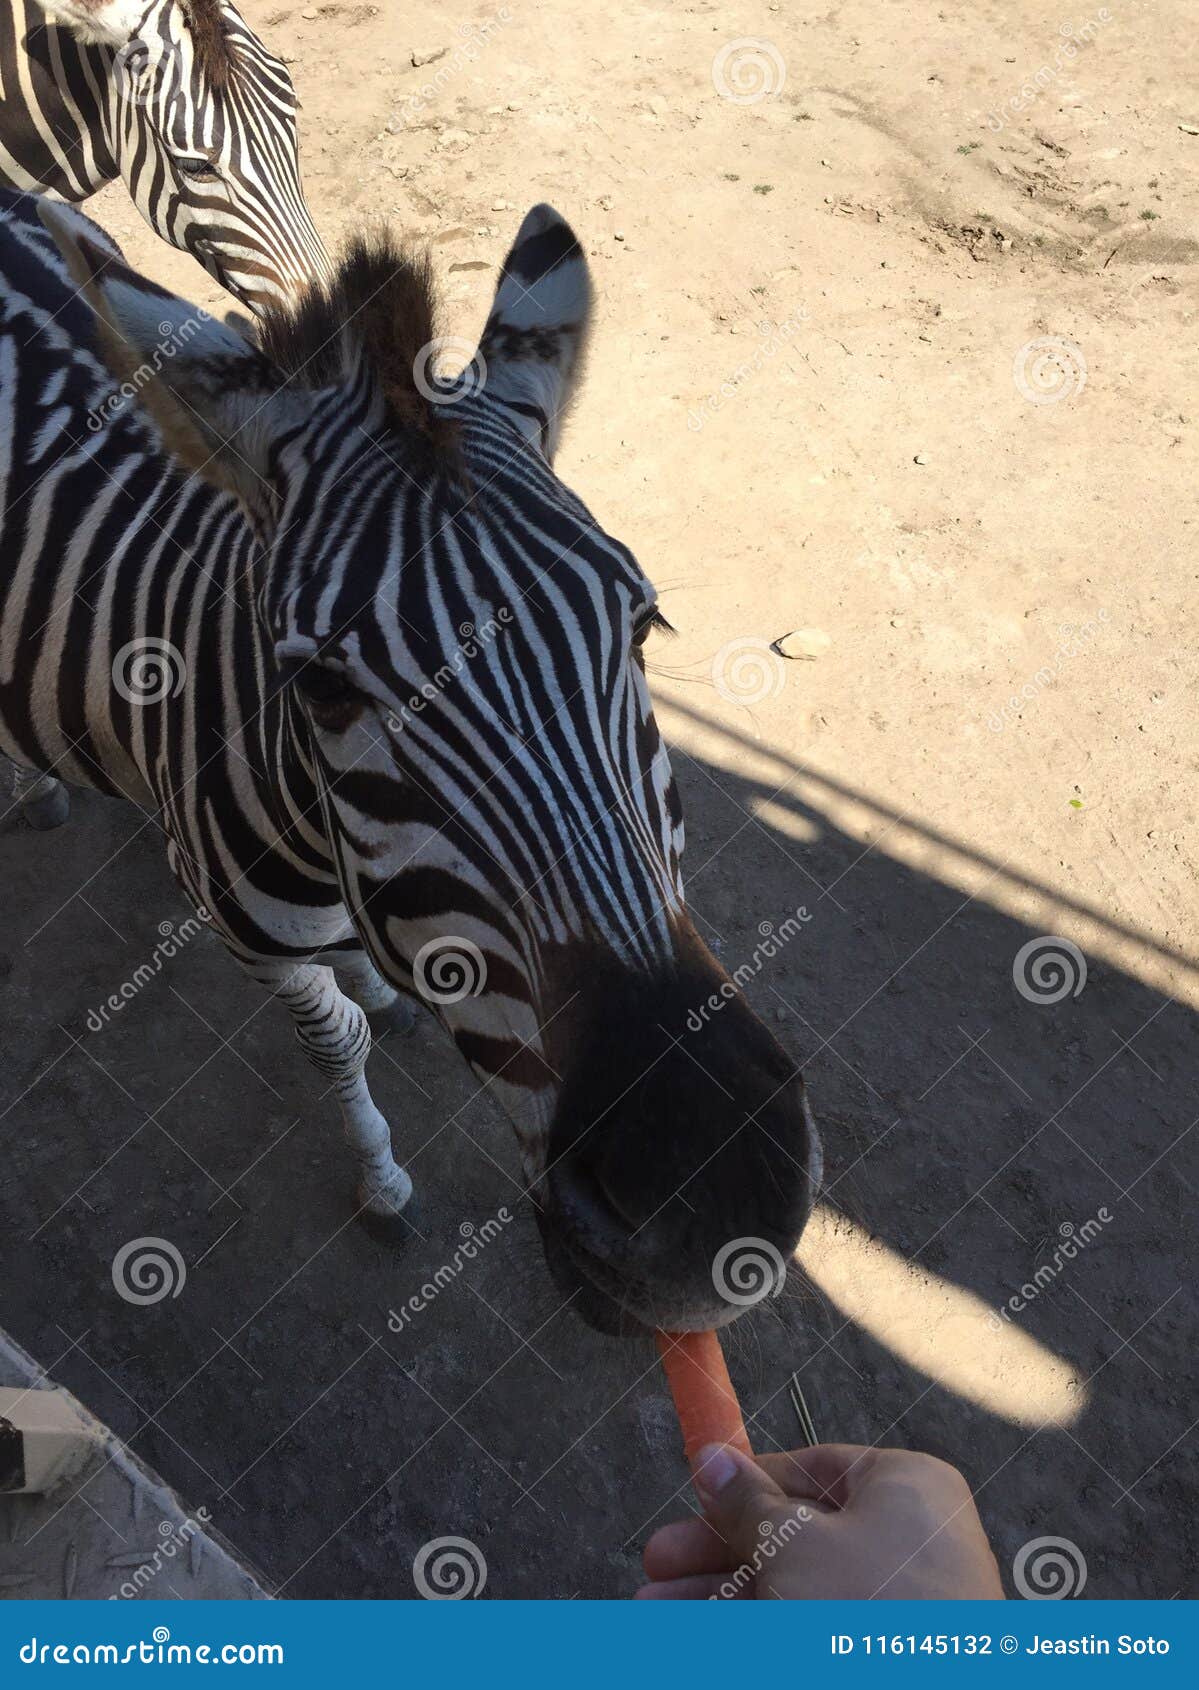 Zebra in the zoo stock photo. Image of animals, eating - 116145132